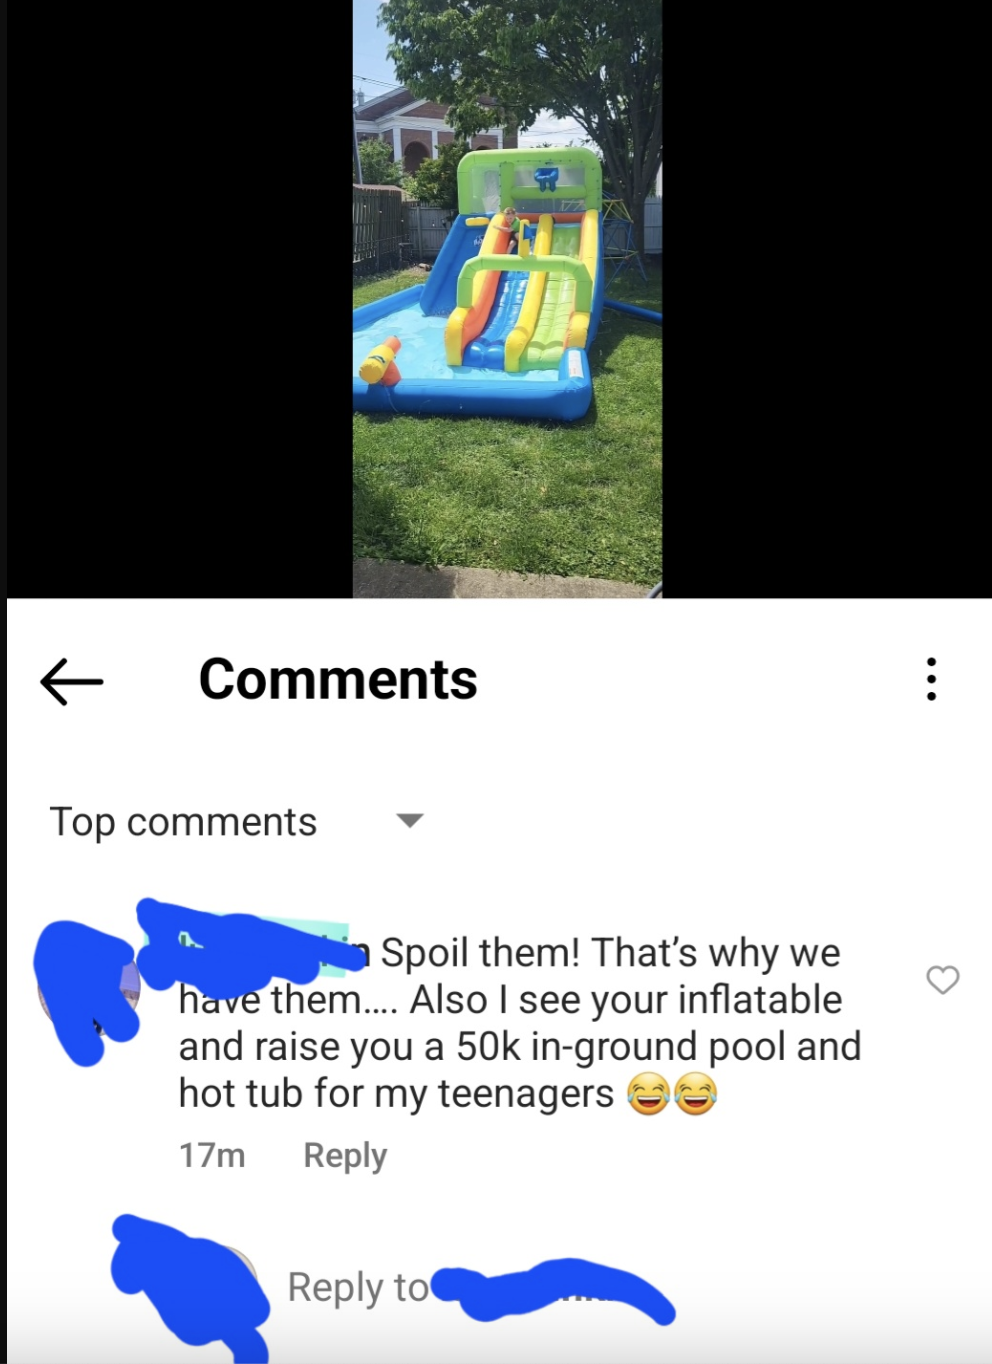 i see your inflatable and raise you a 50K in-ground pool and got tub for my teenagers